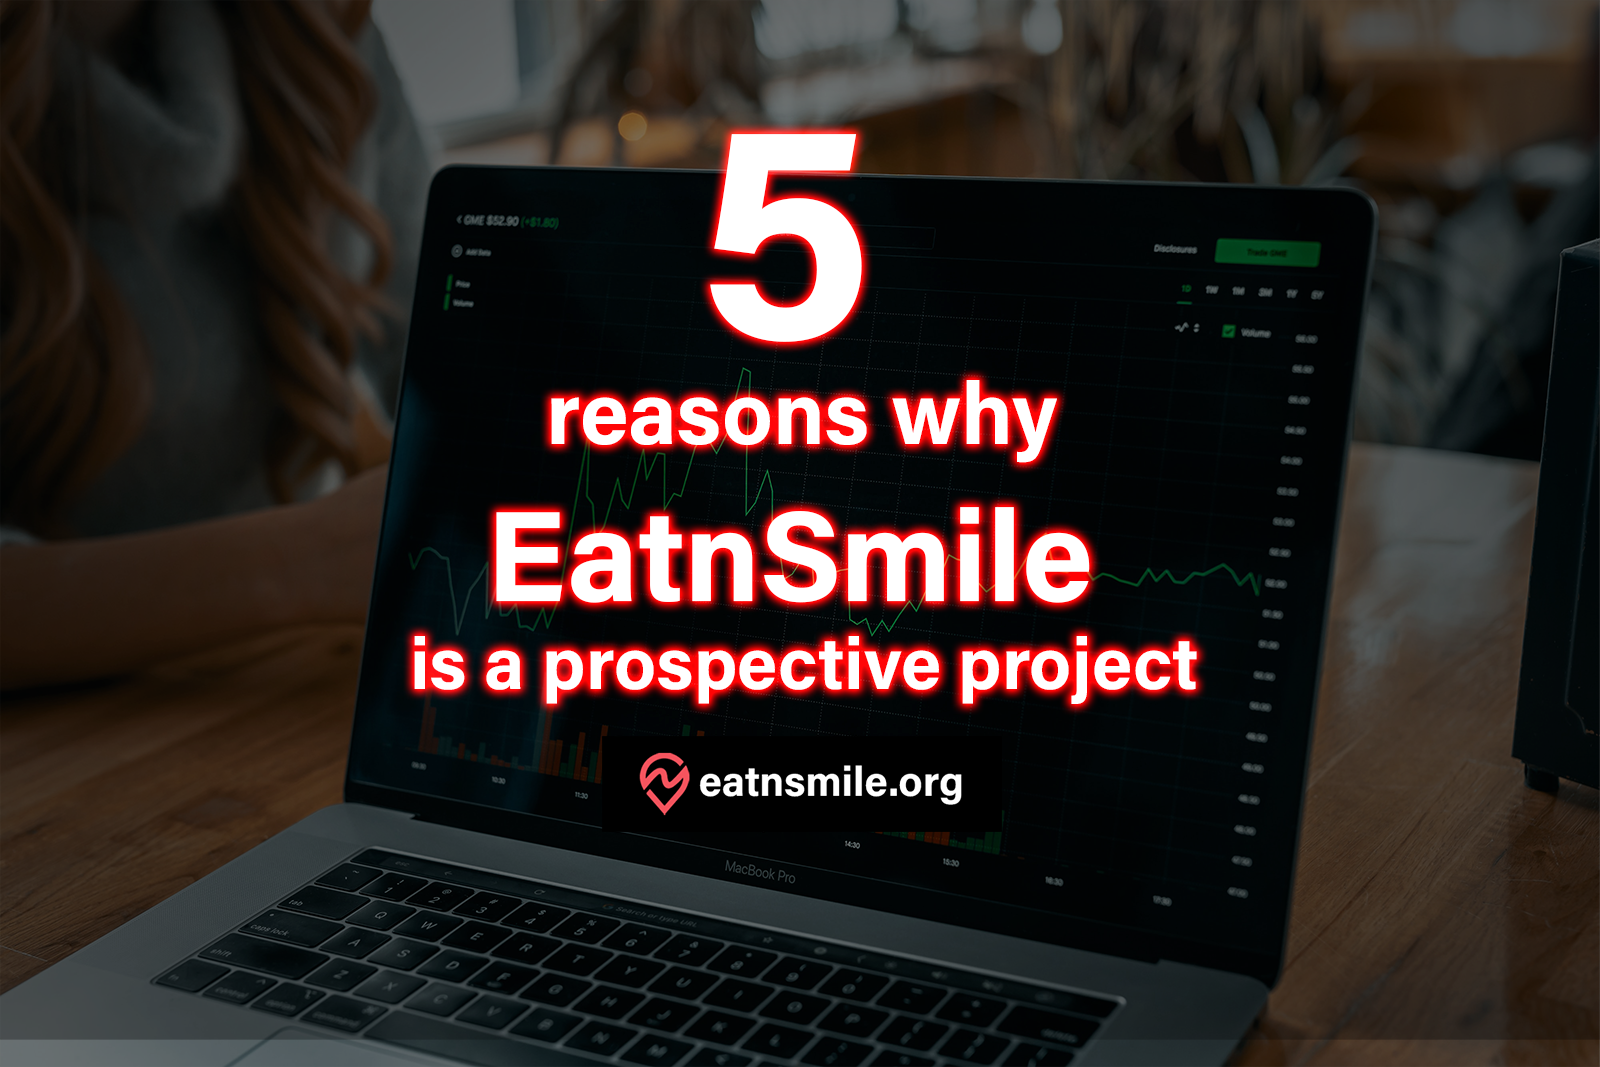 5 reasons why EatnSmile is a prospective project